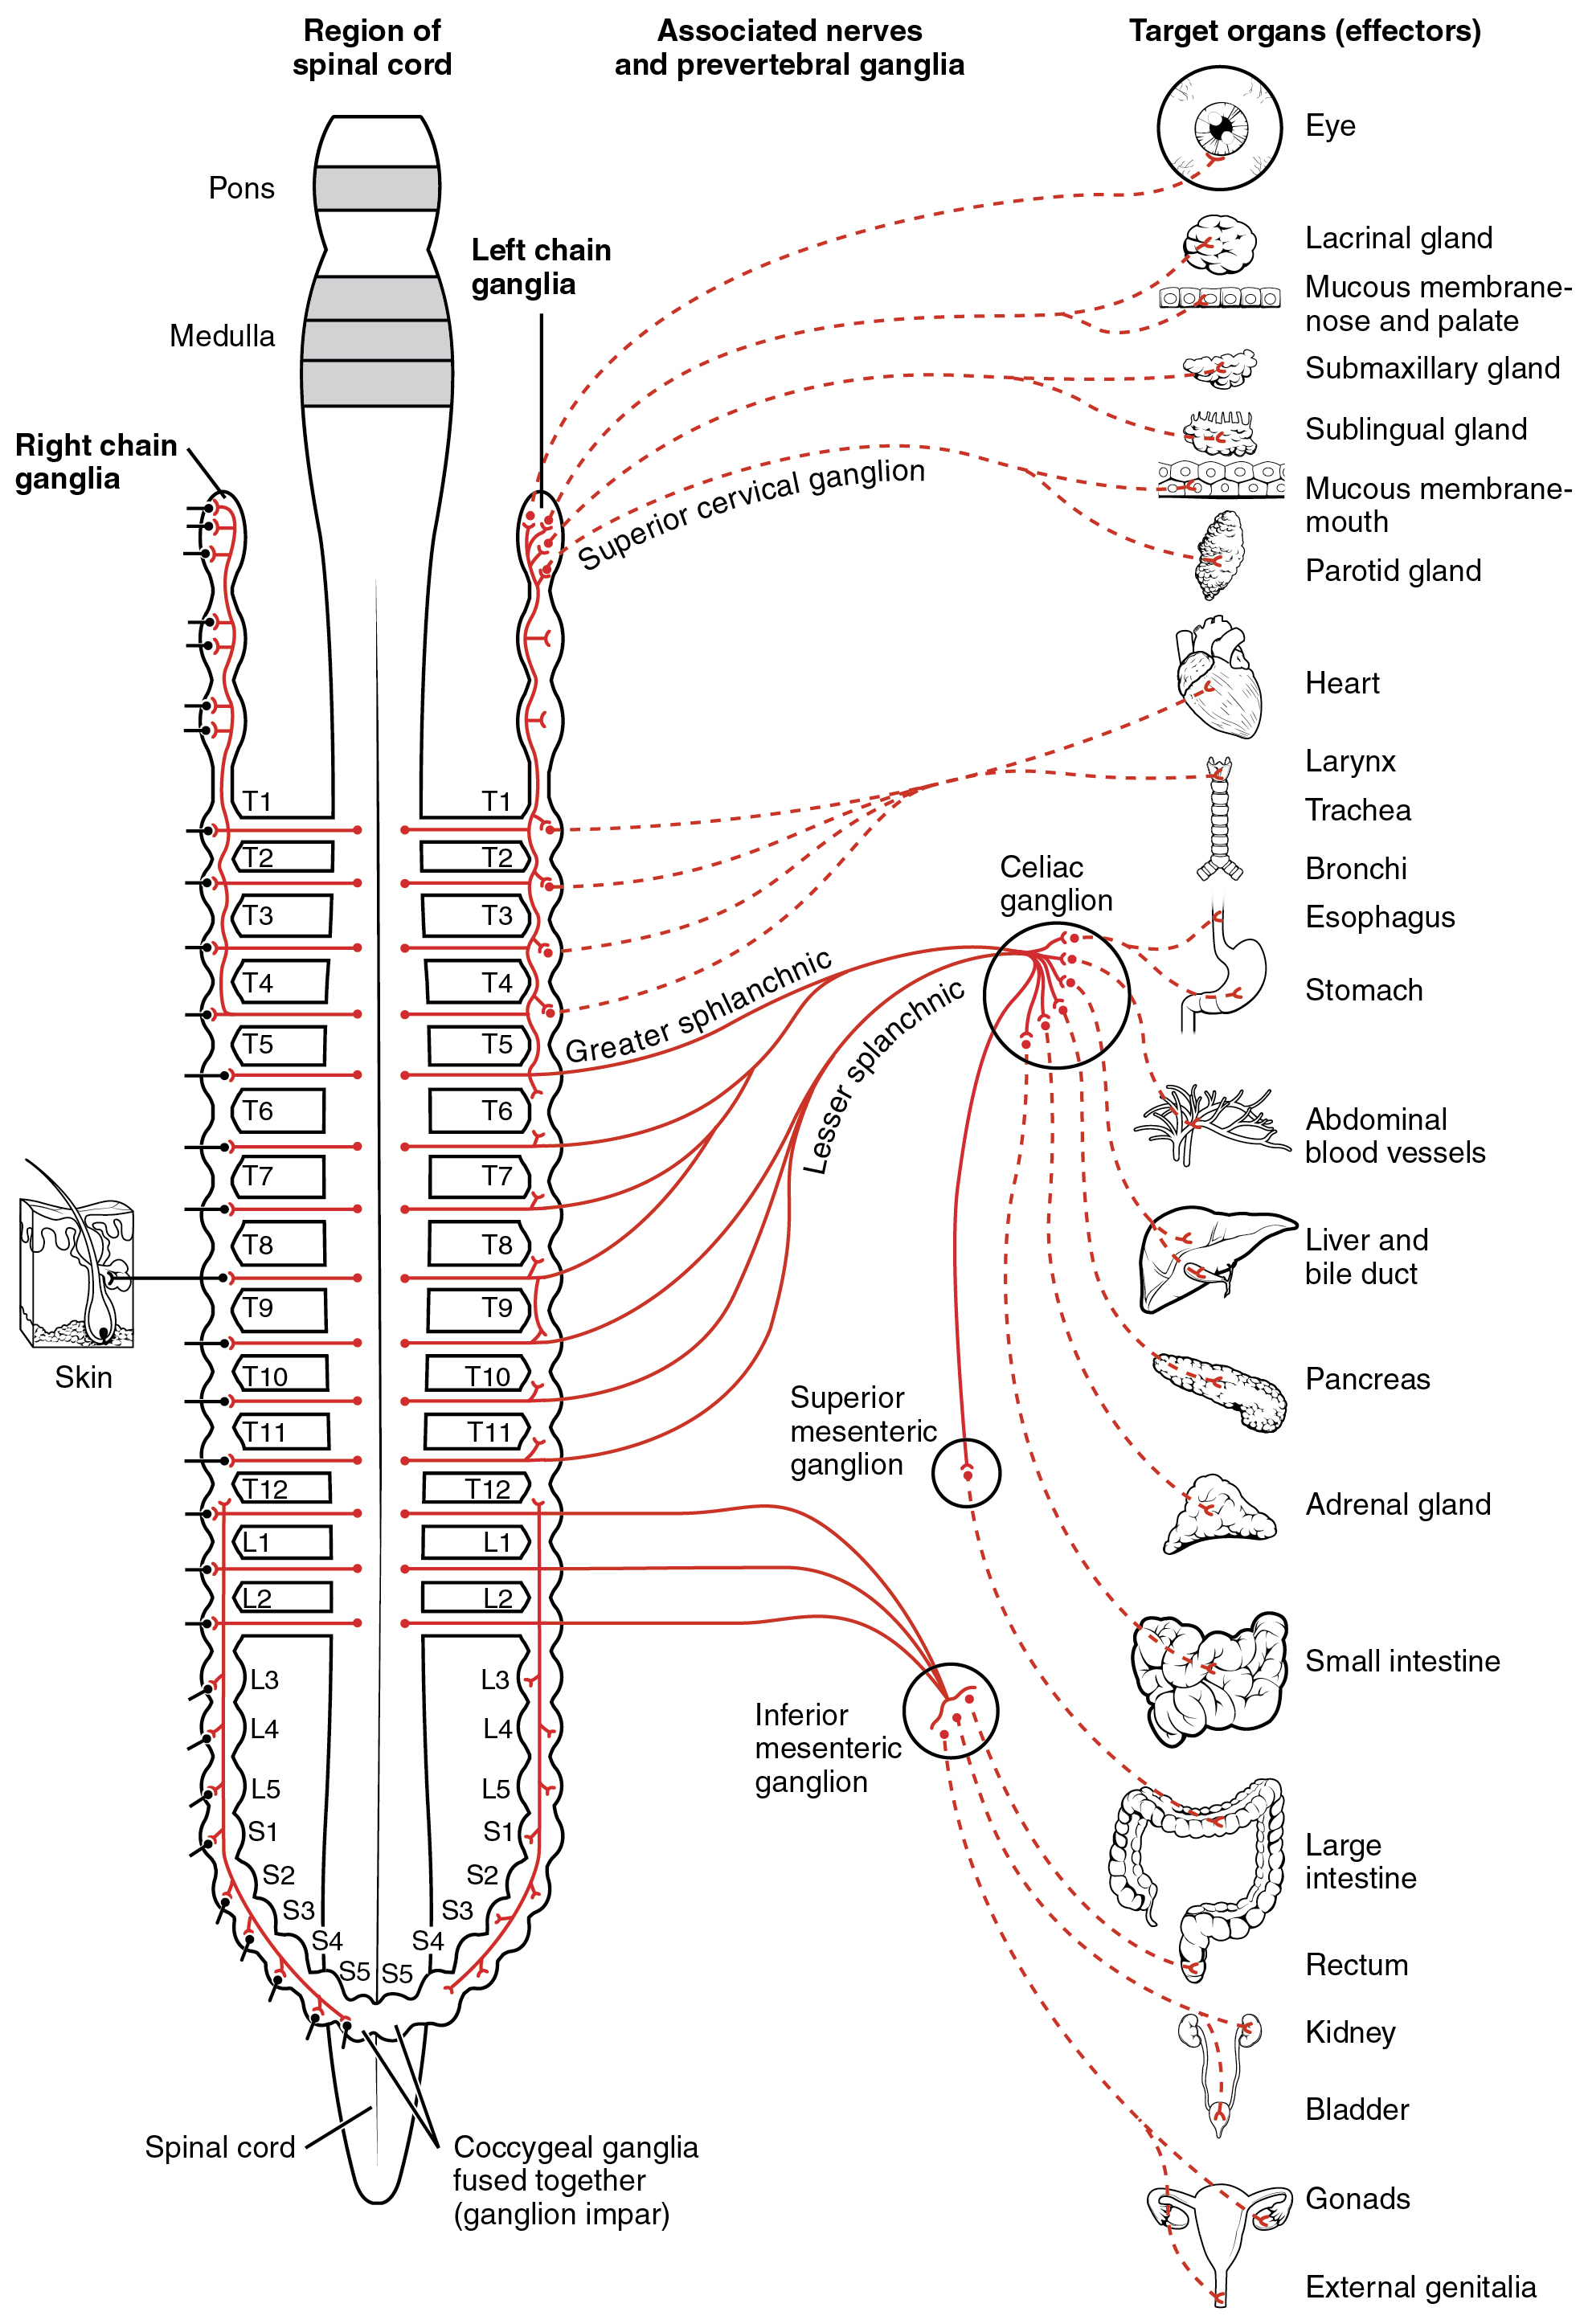 This diagram shows the spinal cord, and the connections from the spinal